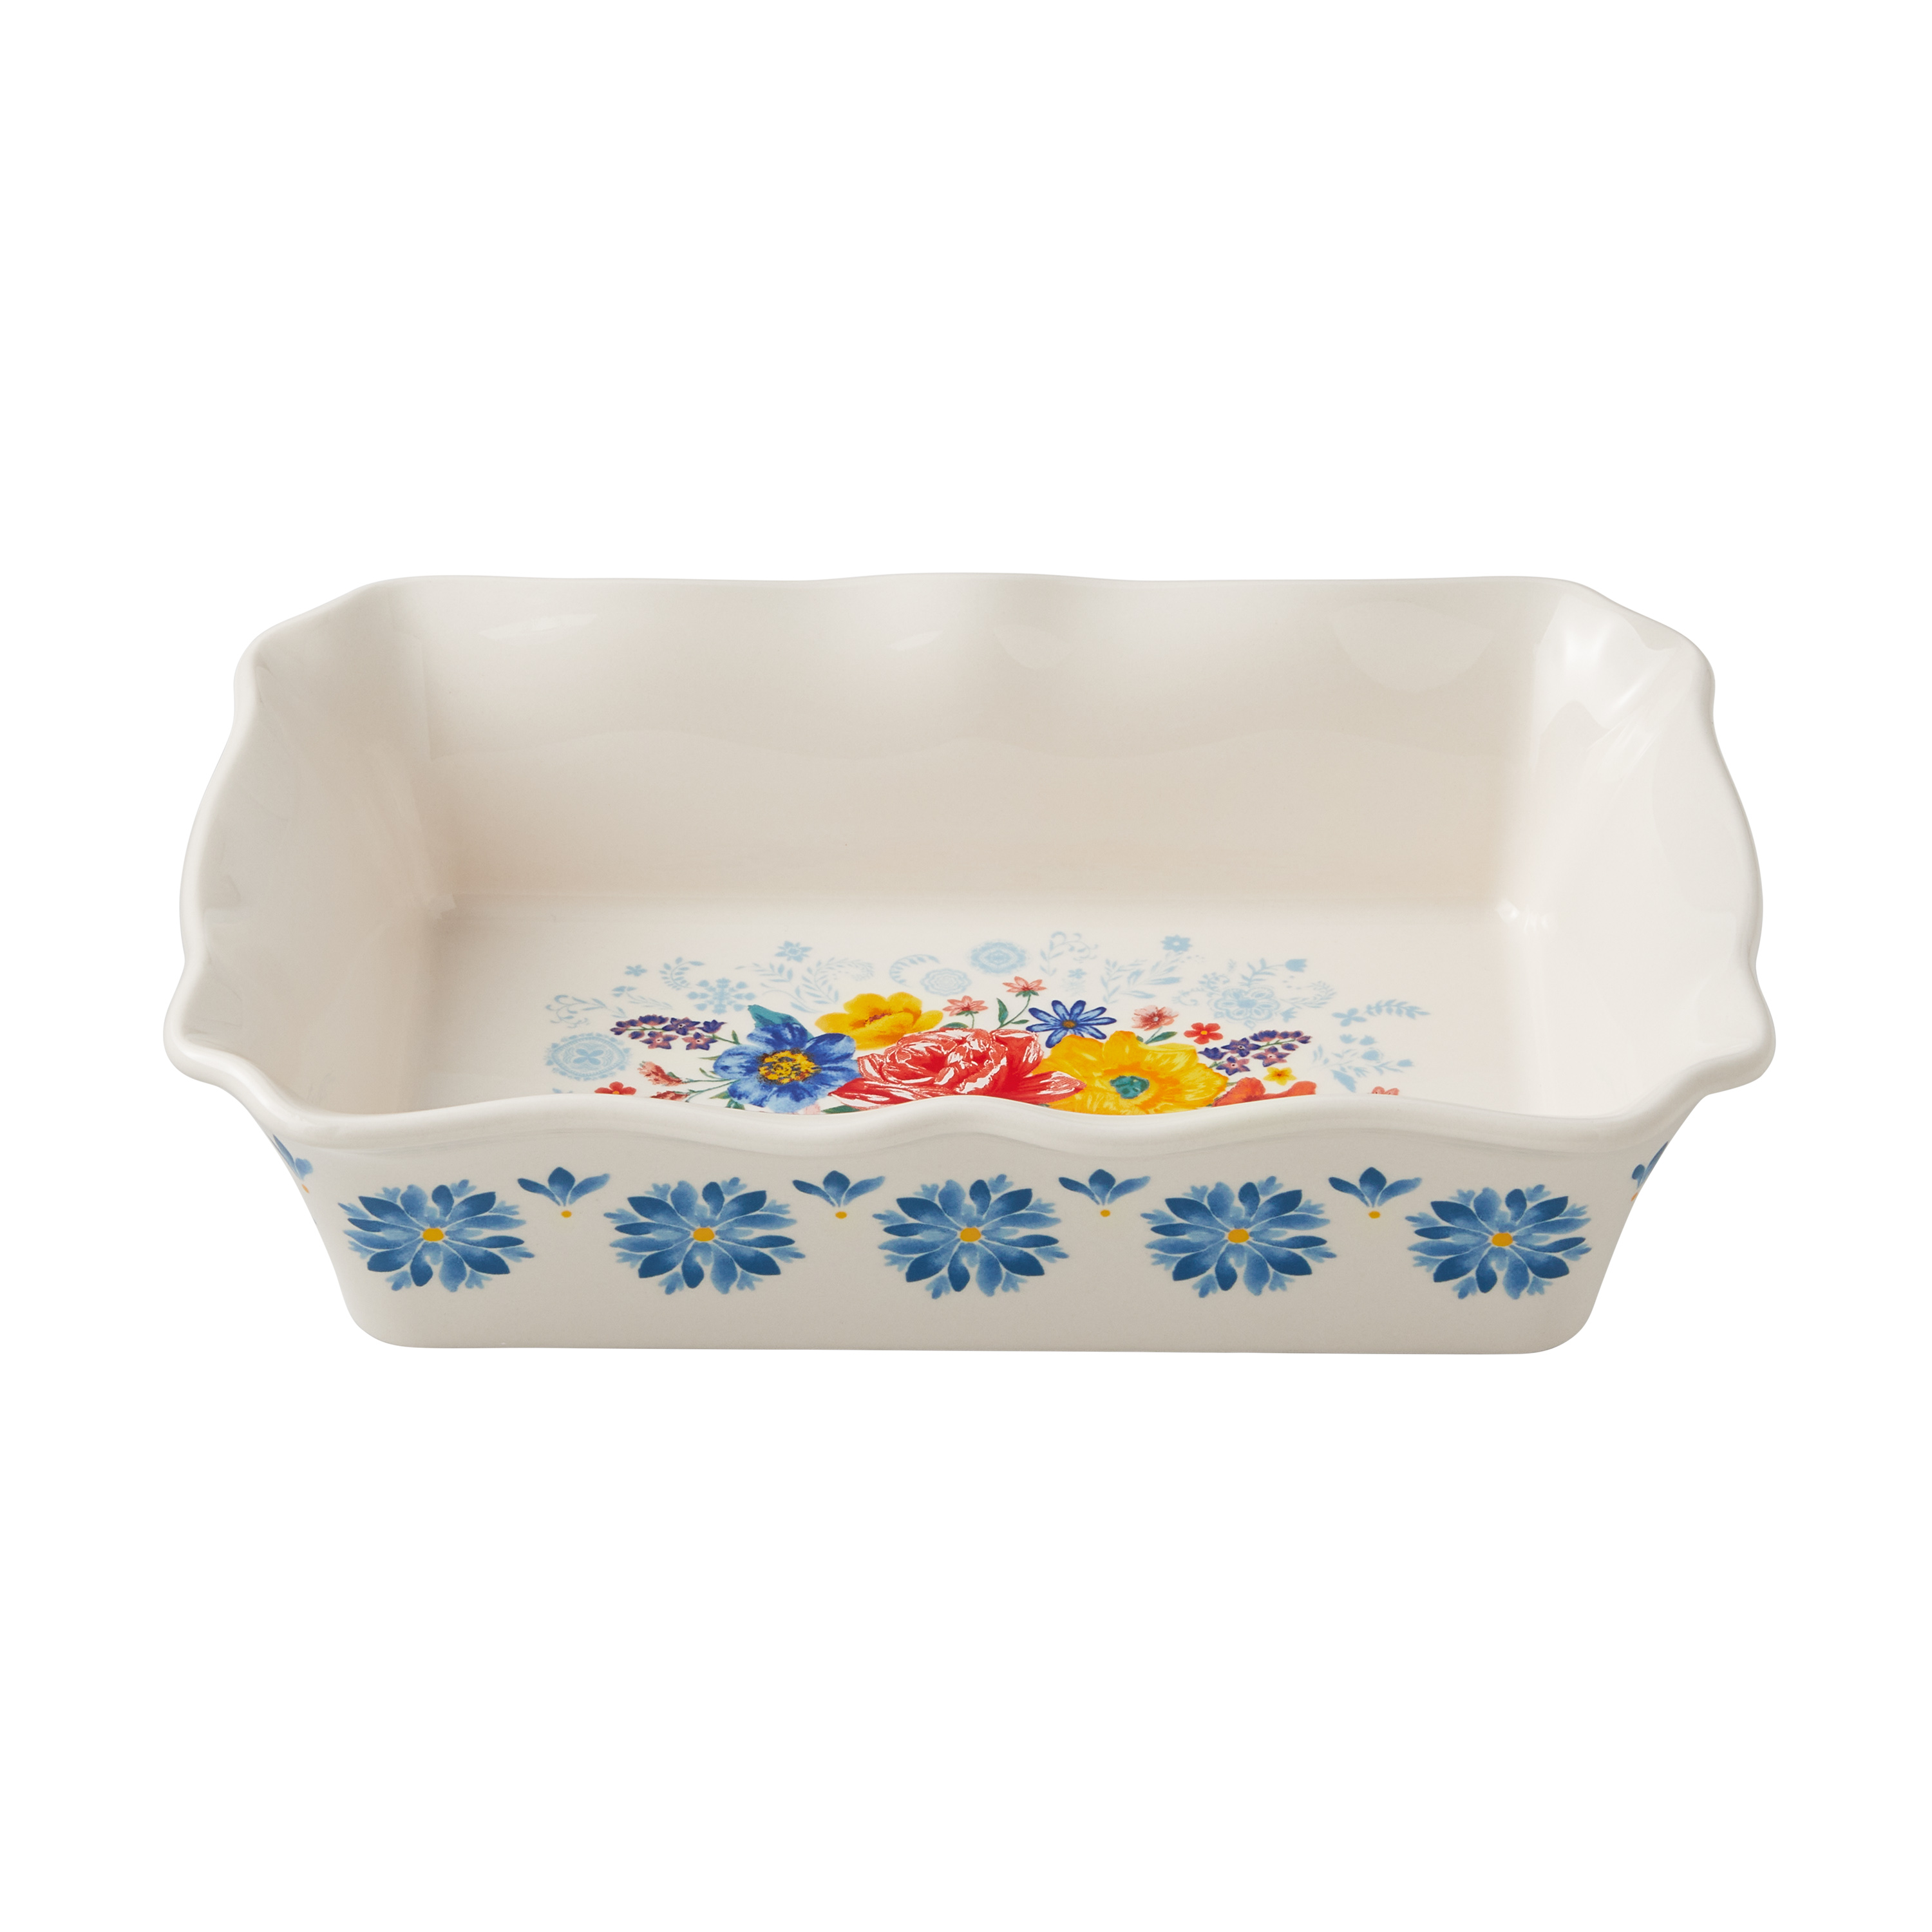 The Pioneer Woman Brilliant Blooms 20-Piece Blue Bake & Prep Set with Baking Dish & Measuring Cups - image 3 of 13